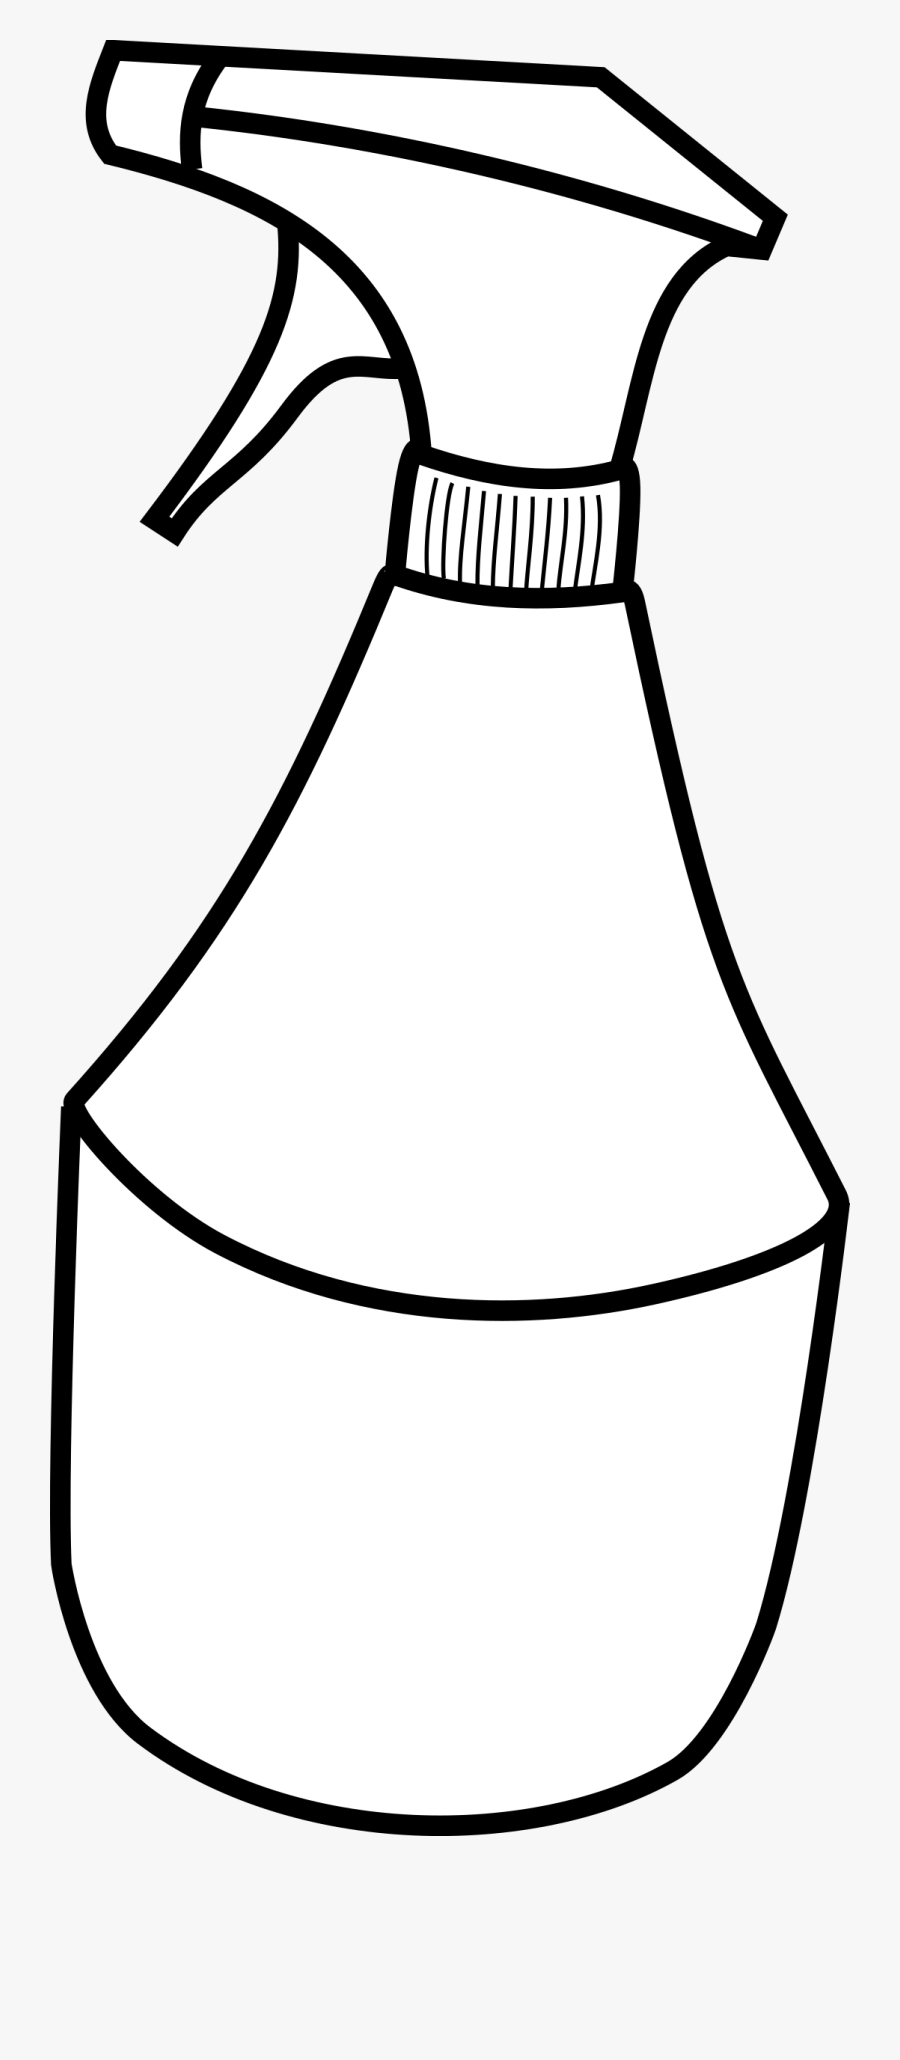 Clipart Library Stock Spray Bottle Clipart, Transparent Clipart